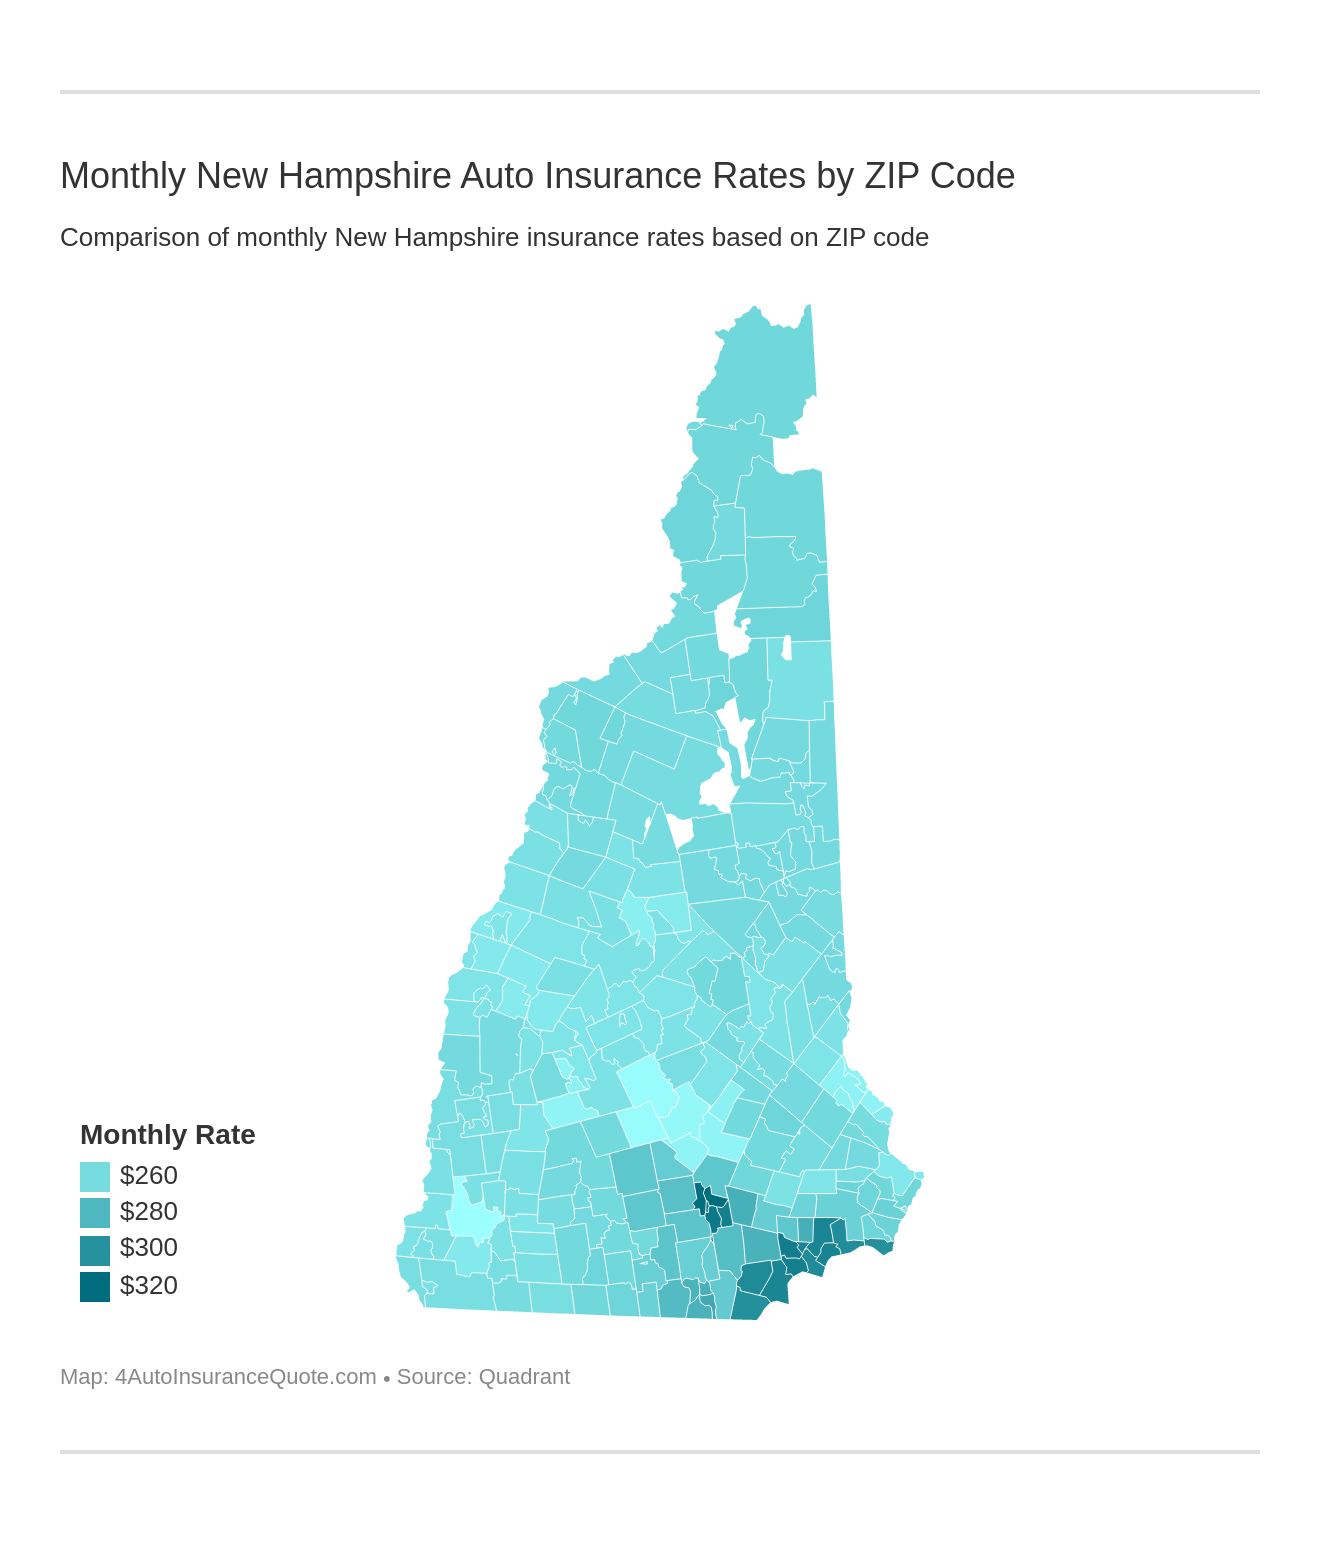 Monthly New Hampshire Auto Insurance Rates by ZIP Code